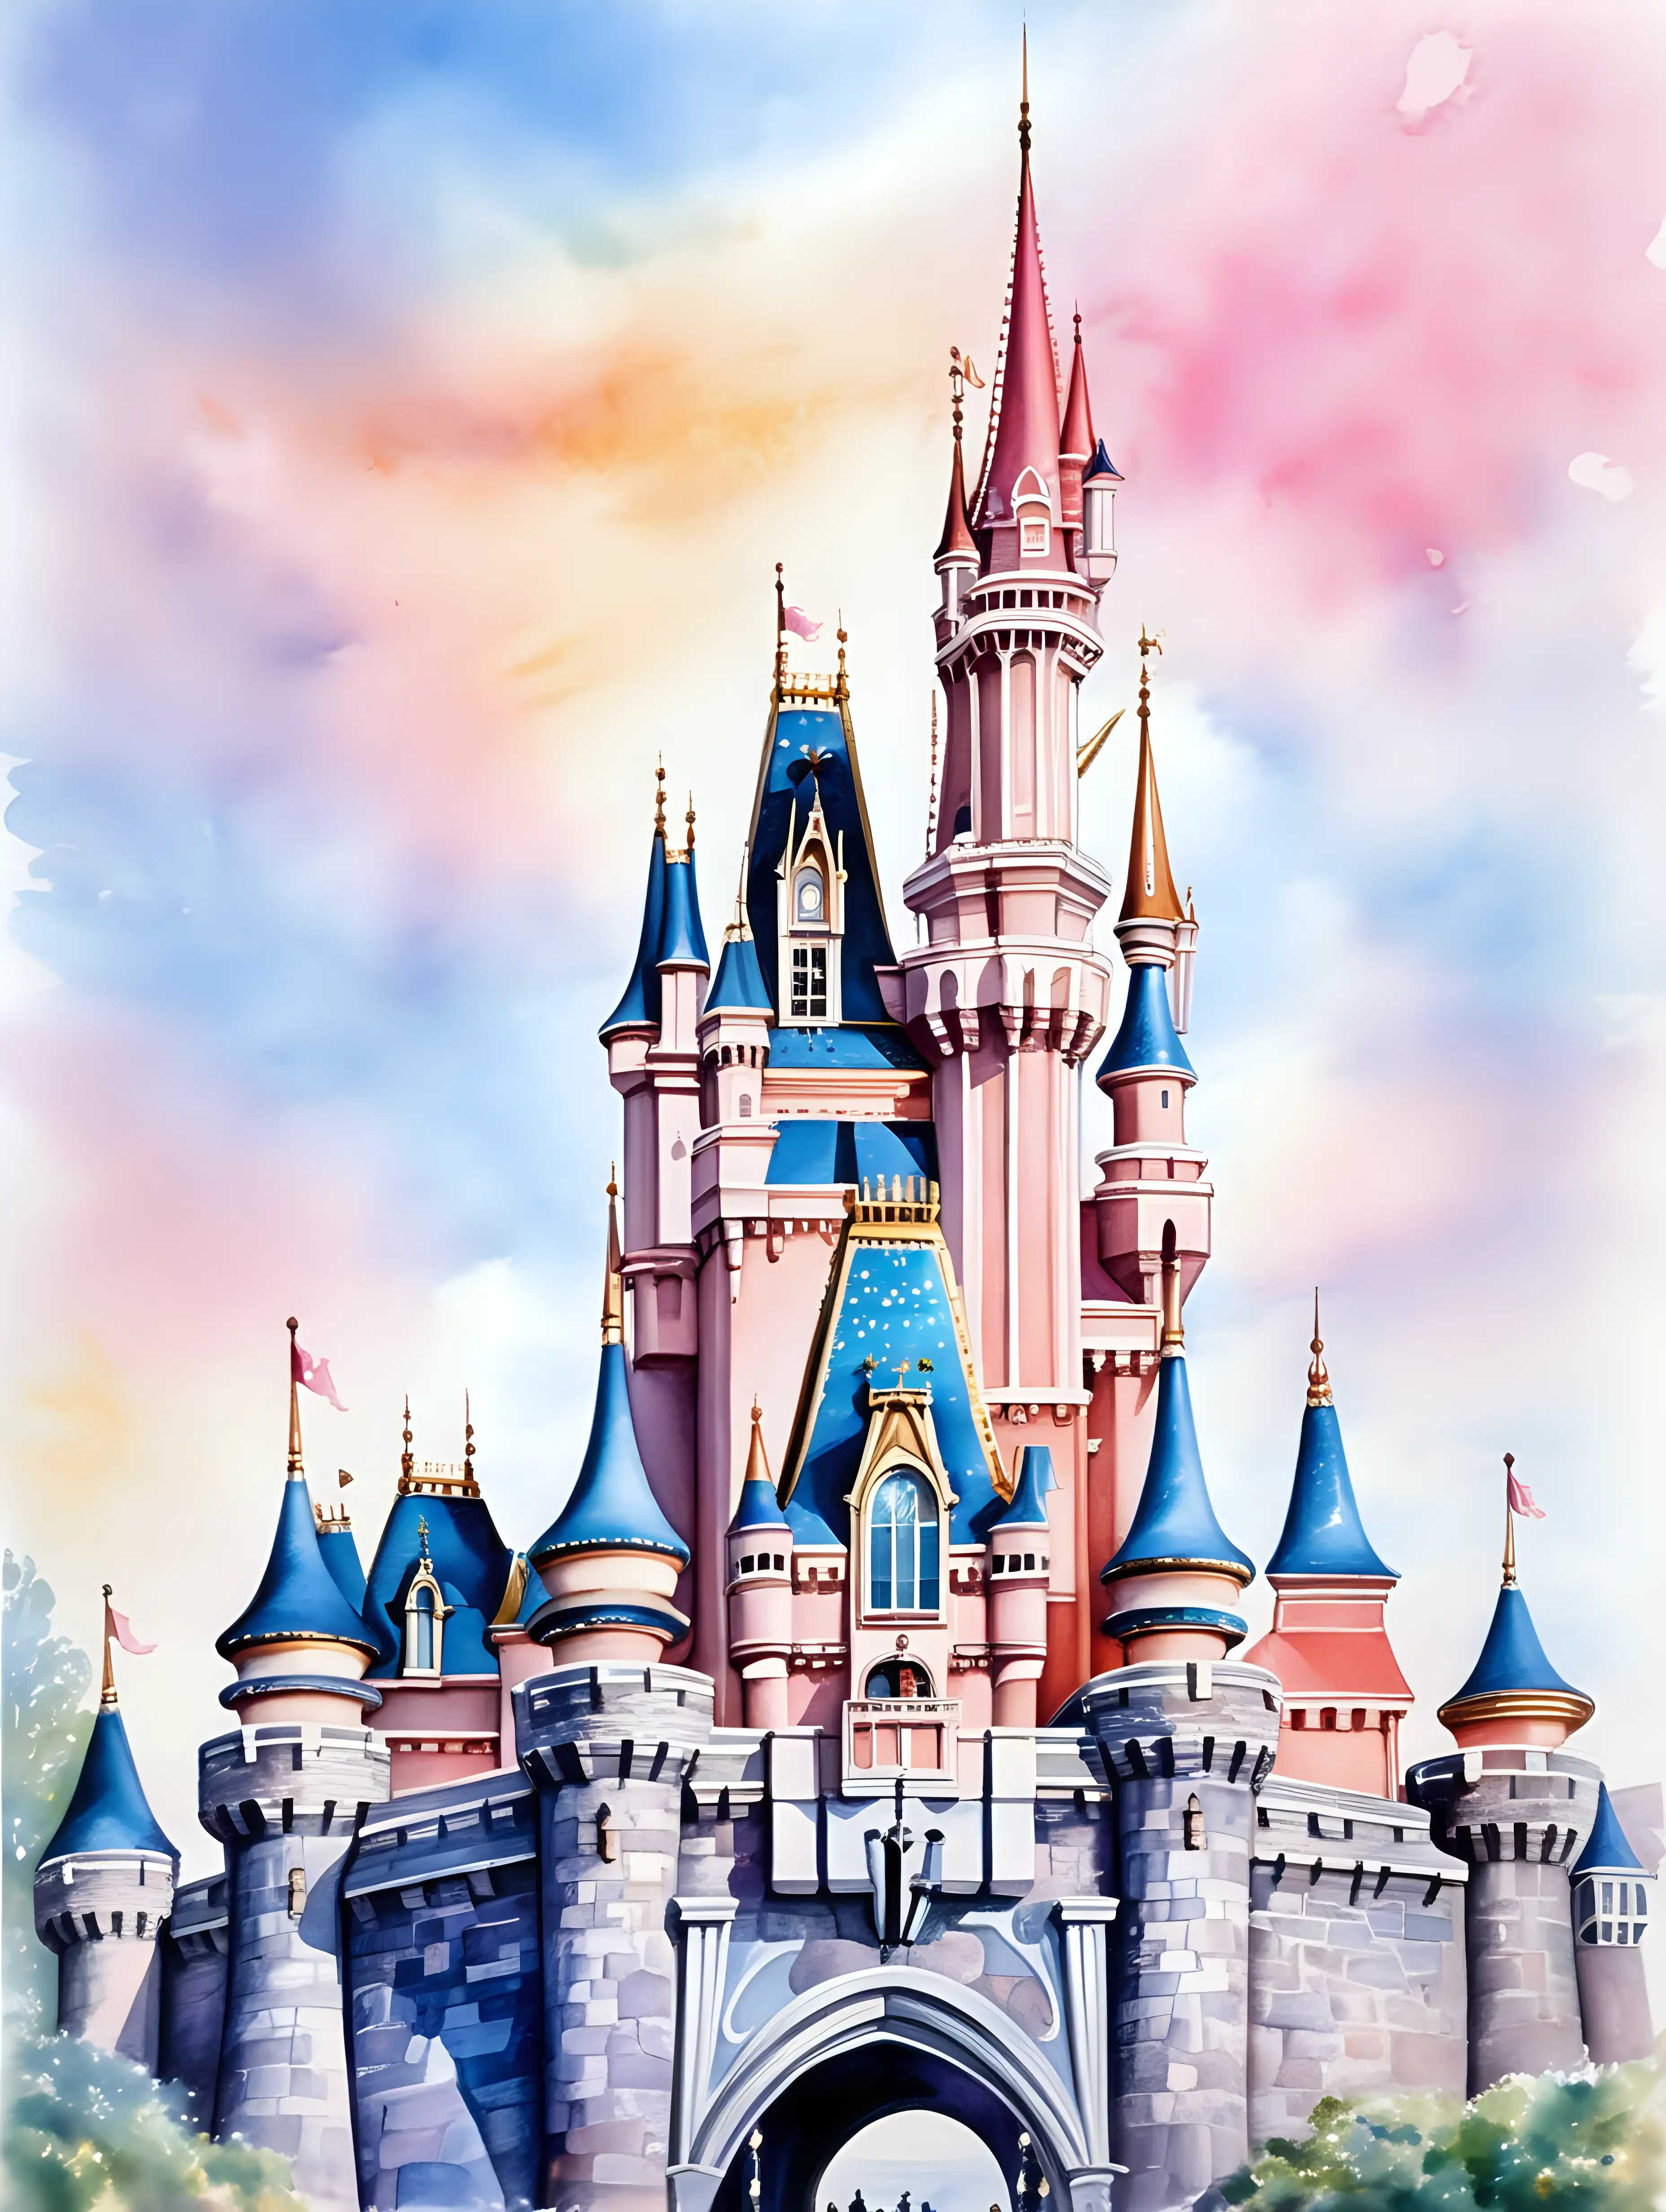 Disneyland castle watercolor painting, majestic, set in the daytime, bright and light, pastel colors, no sky or background 